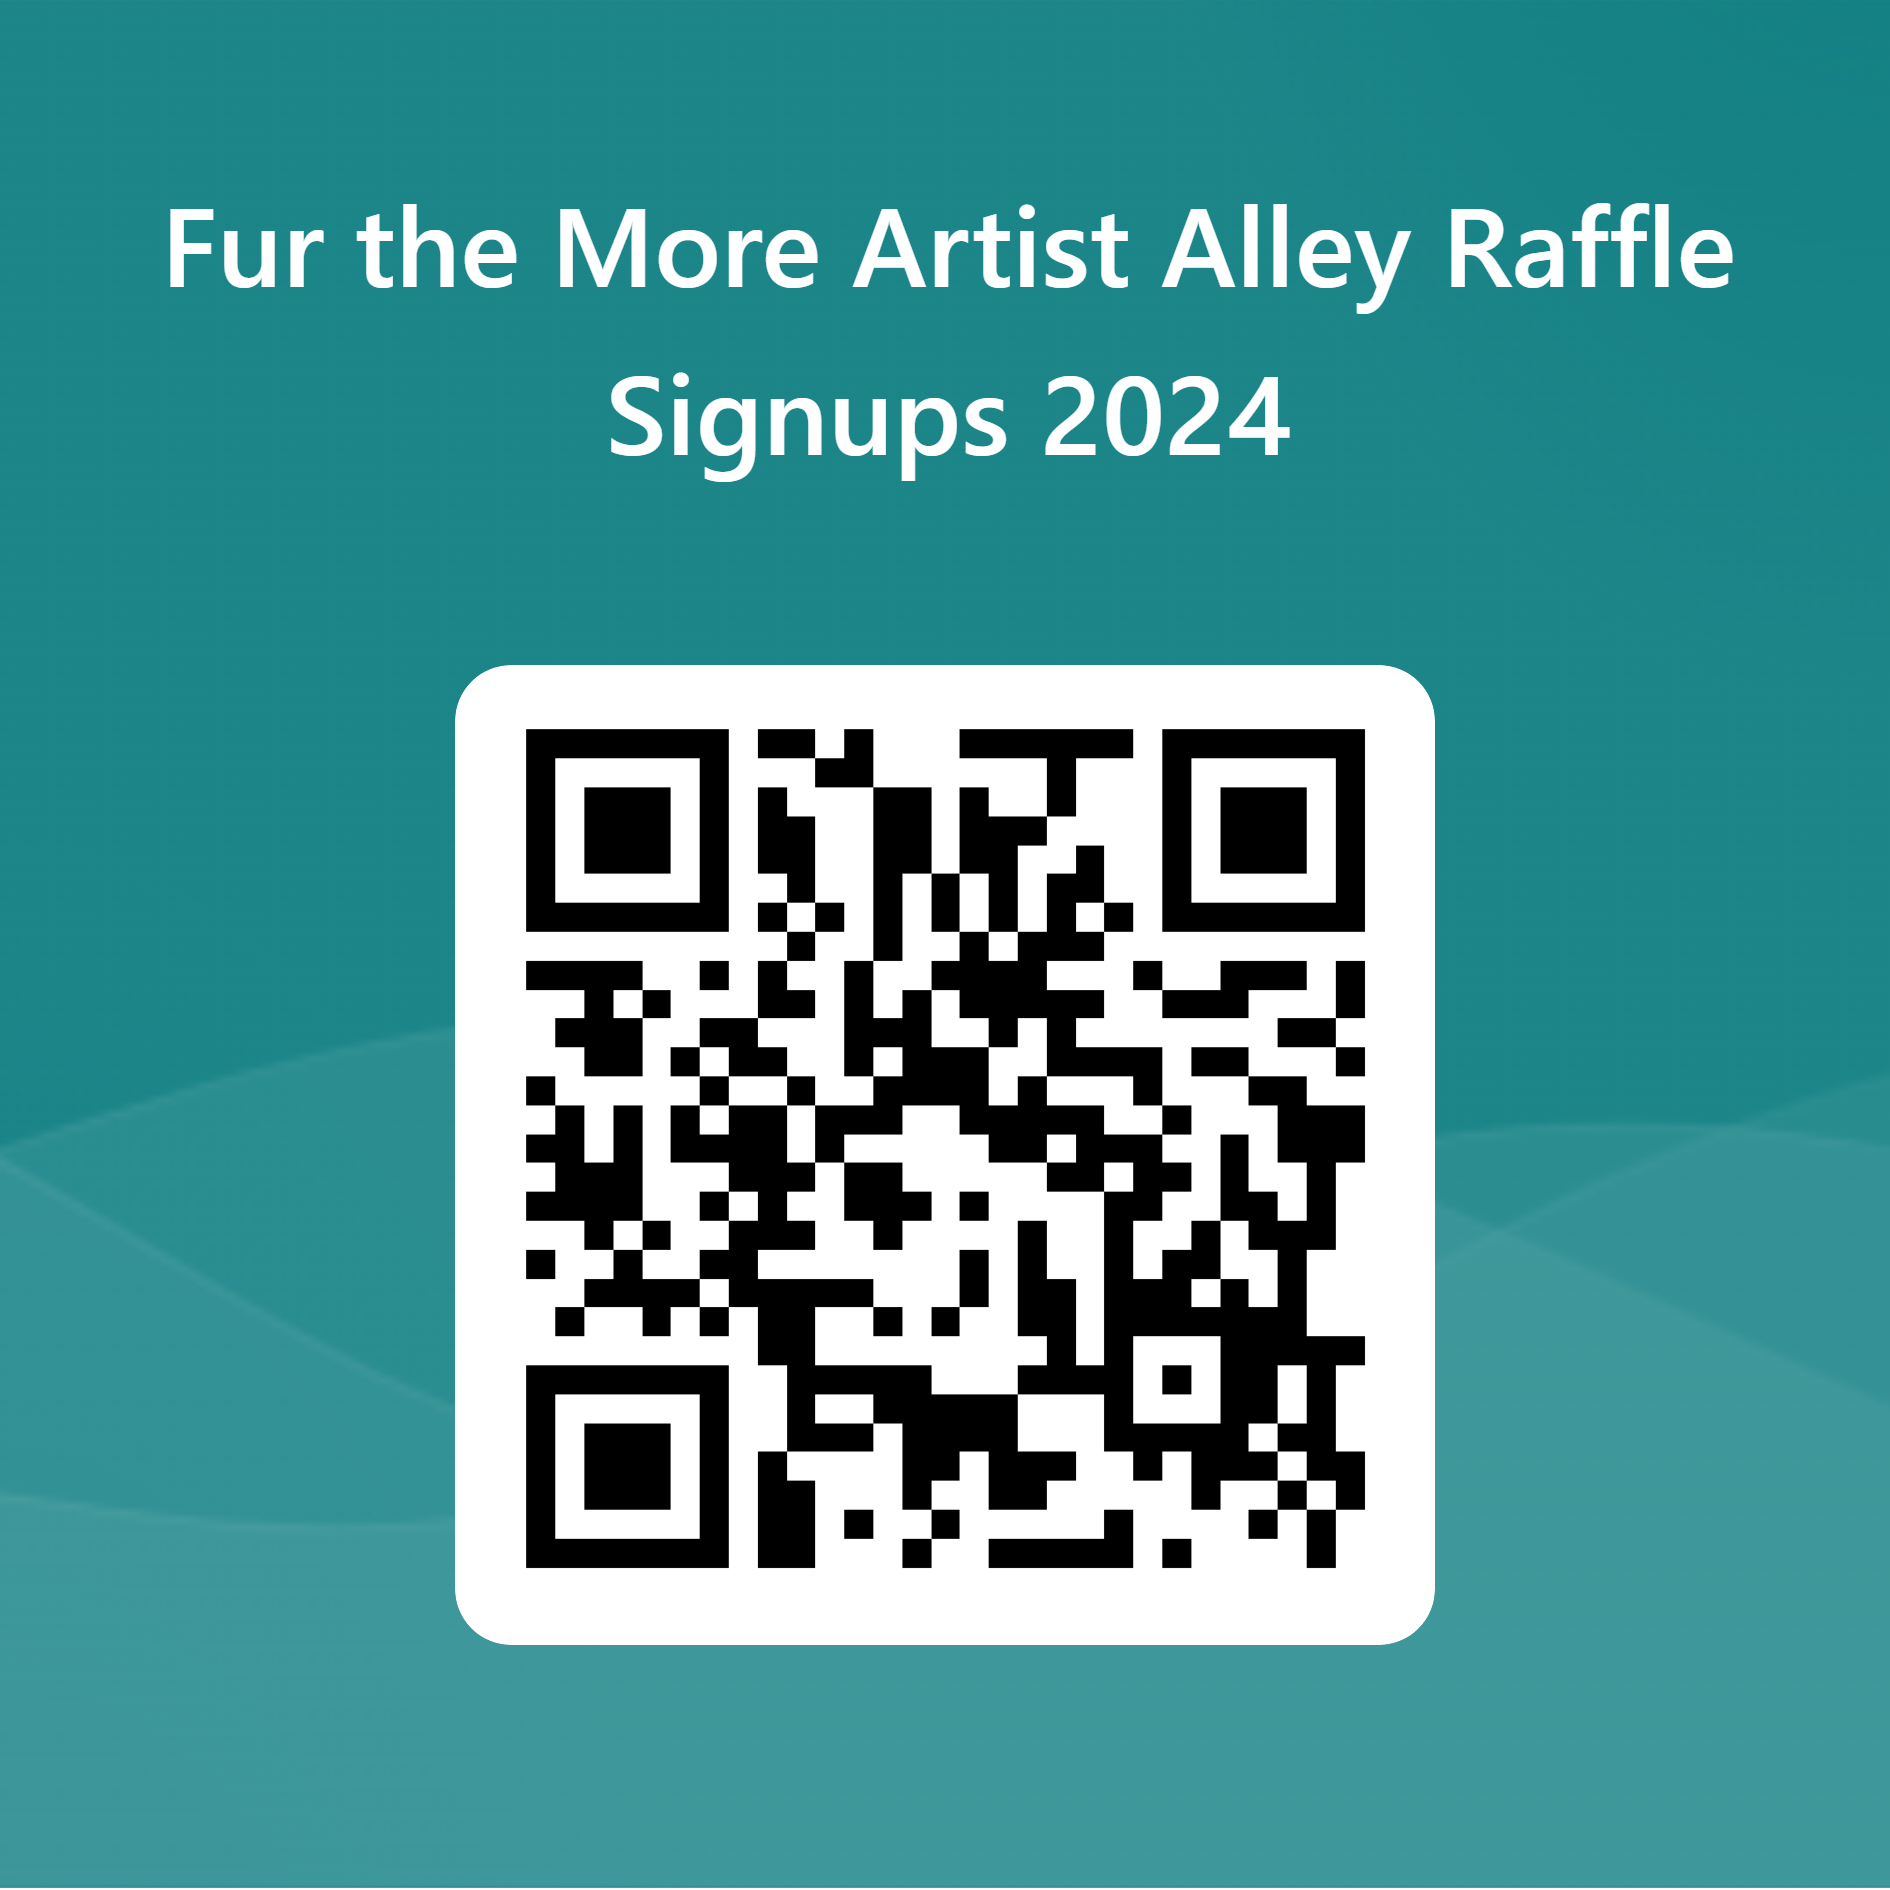 the QR code for the artist table signups available at https://bitly.ws/3ffGU above